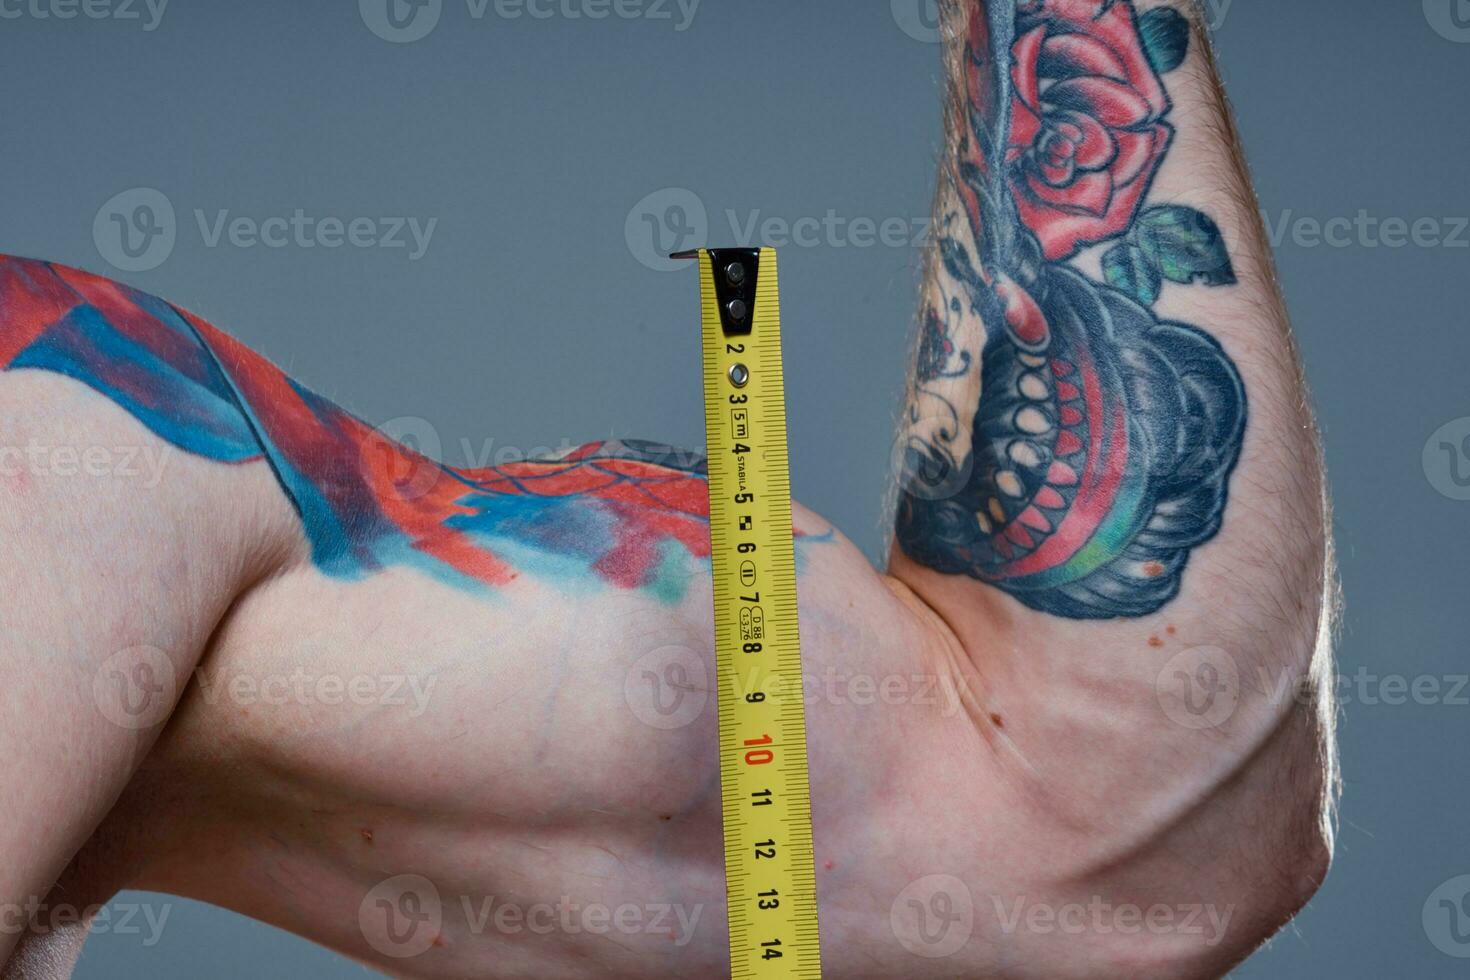 guy measures arm muscles with centimeters on a gray background and a multicolored tattoo bodybuilder fitness photo